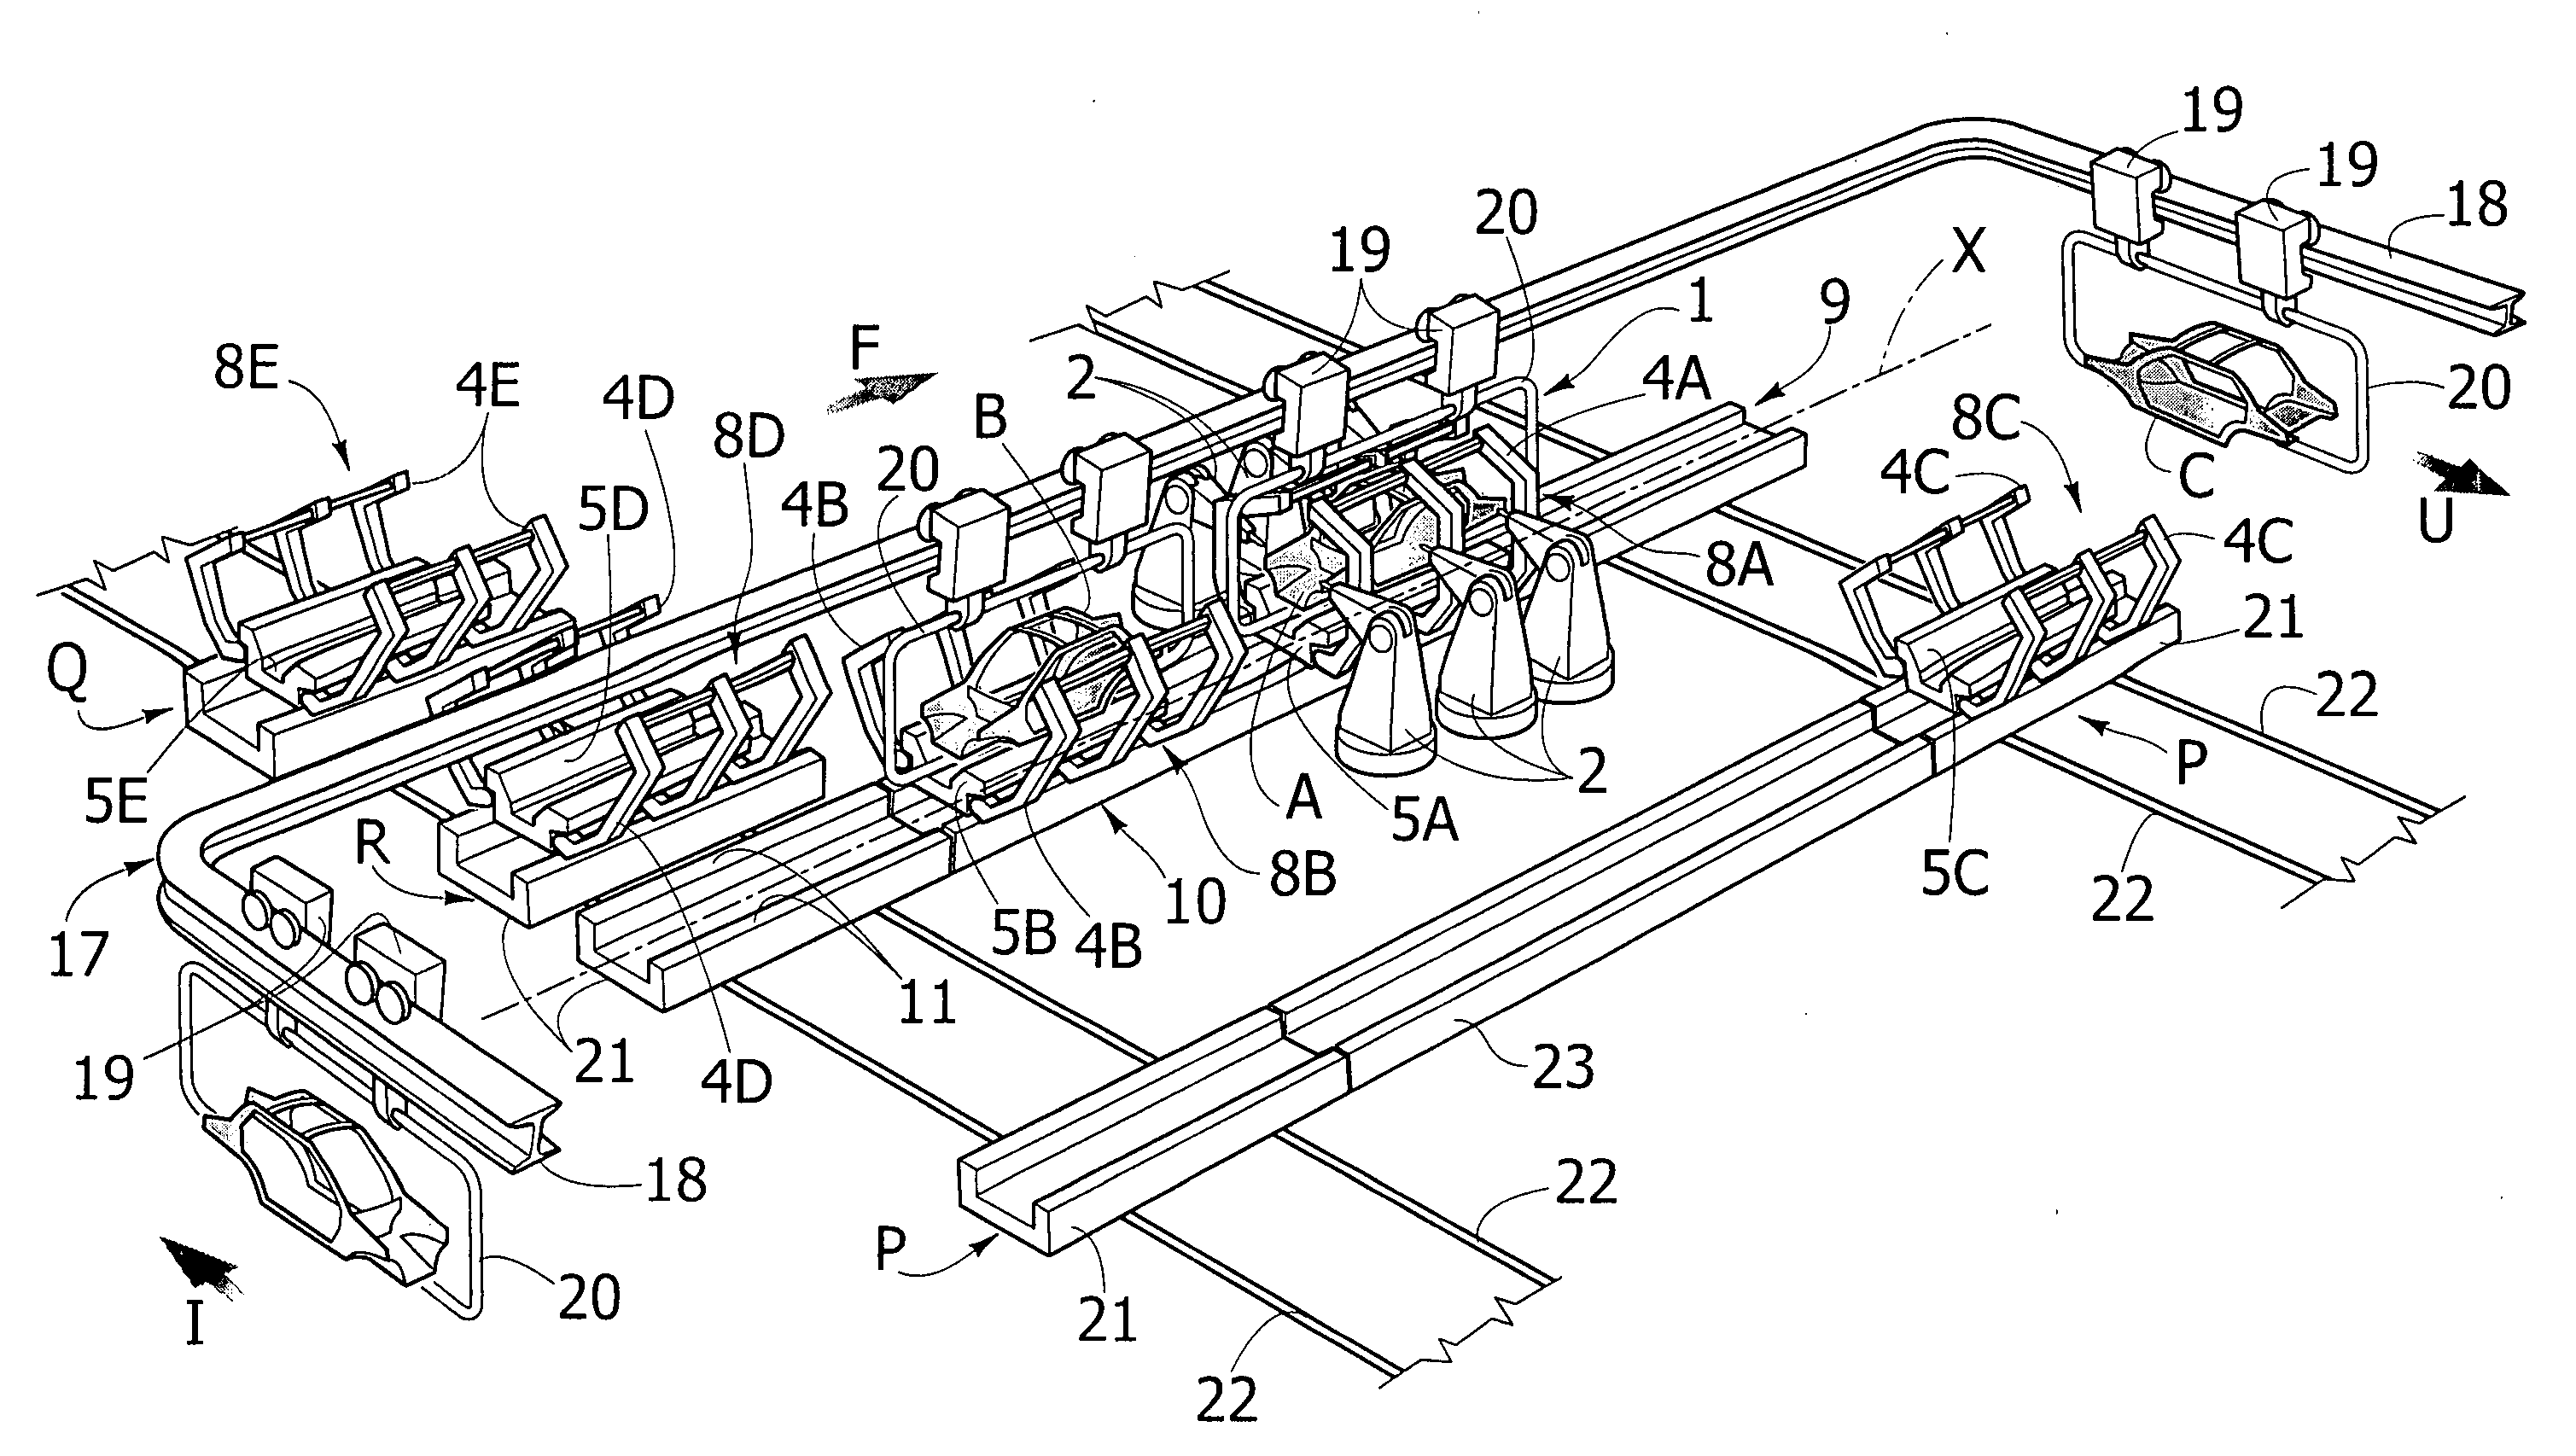 System for assembling, in particular by welding, structures made up of elements of pressed sheet metal, such as motor-vehicle bodies or subassemblies thereof